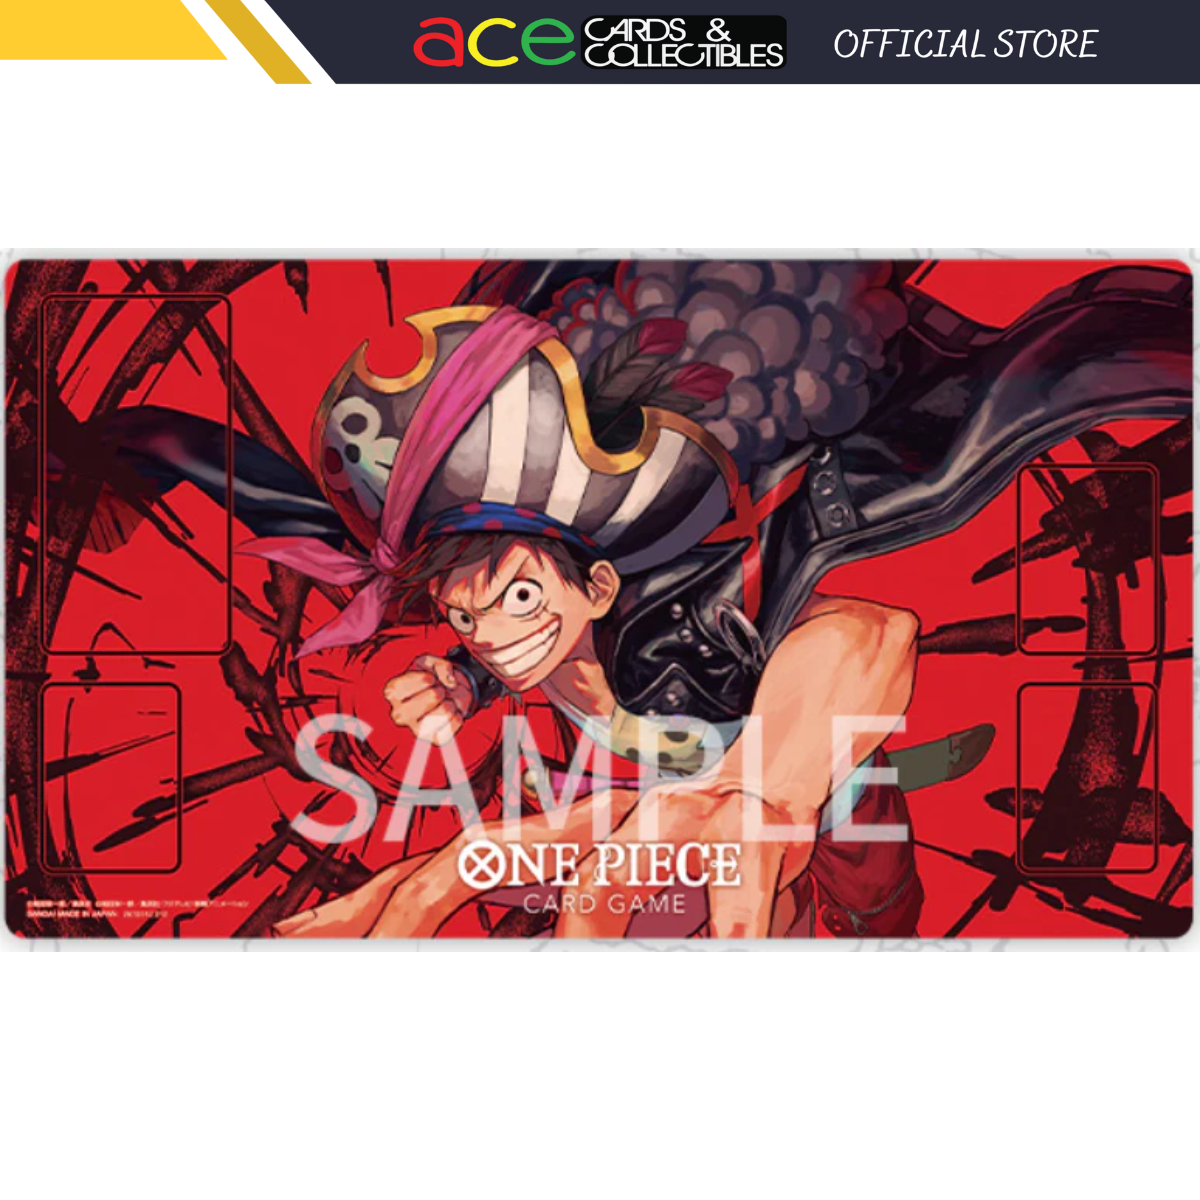 One Piece Card Game "Monkey. D. Luffy" Official Playmat-Bandai-Ace Cards & Collectibles